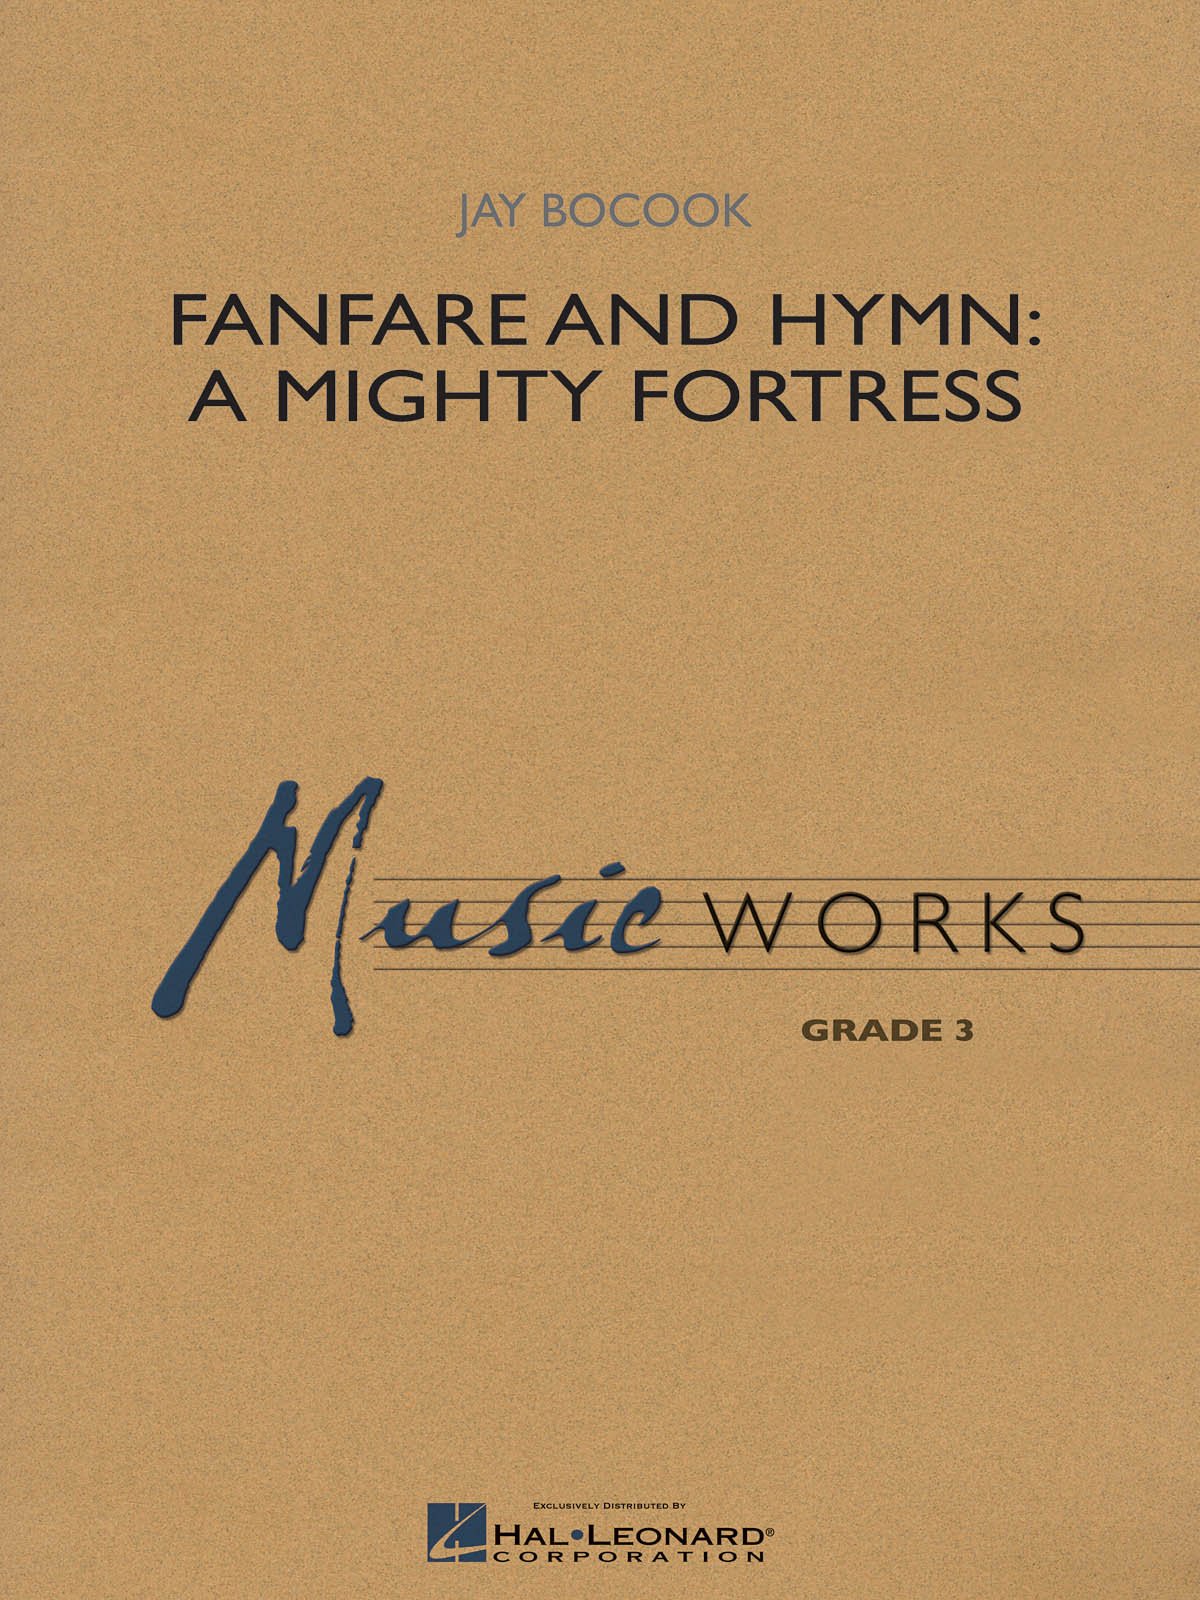 Jay Bocook: Fanfare and Hymn: A Mighty fuertress